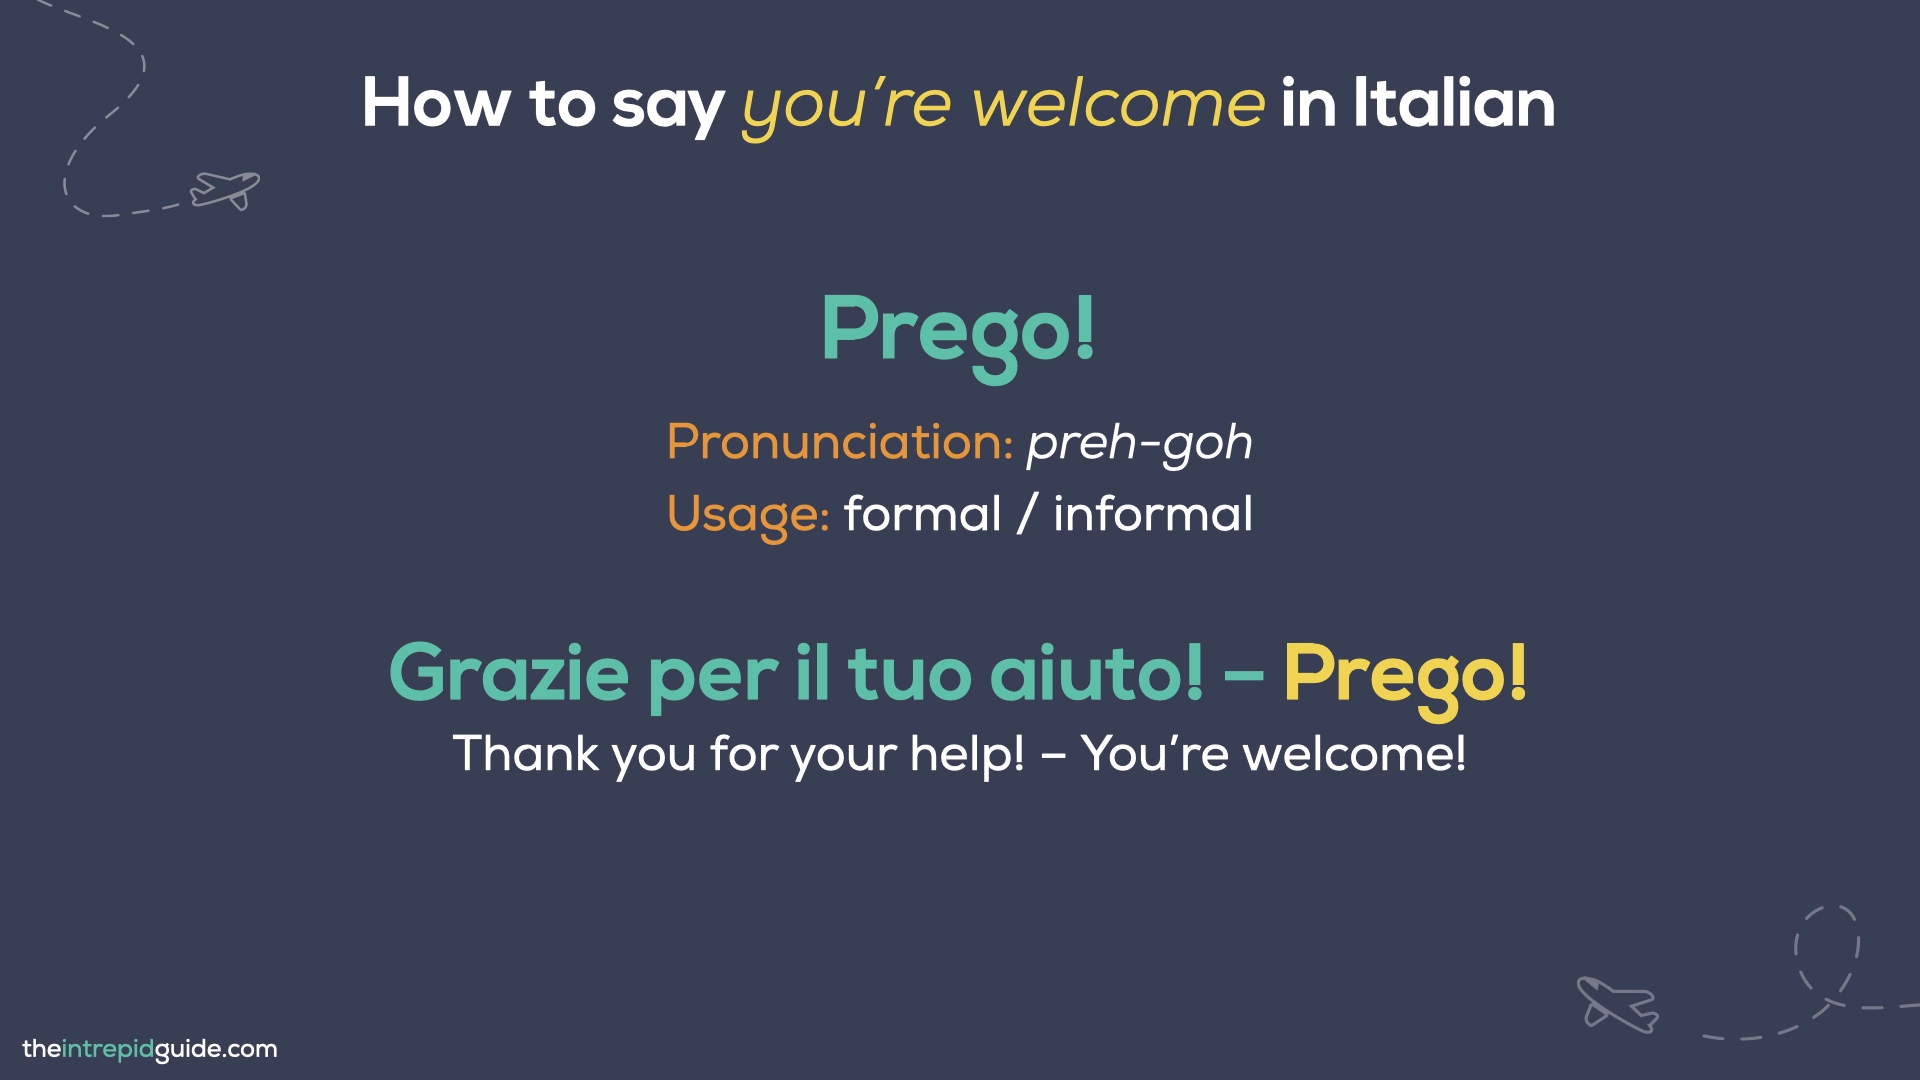 How to Say You're Welcome in Italian - Prego!